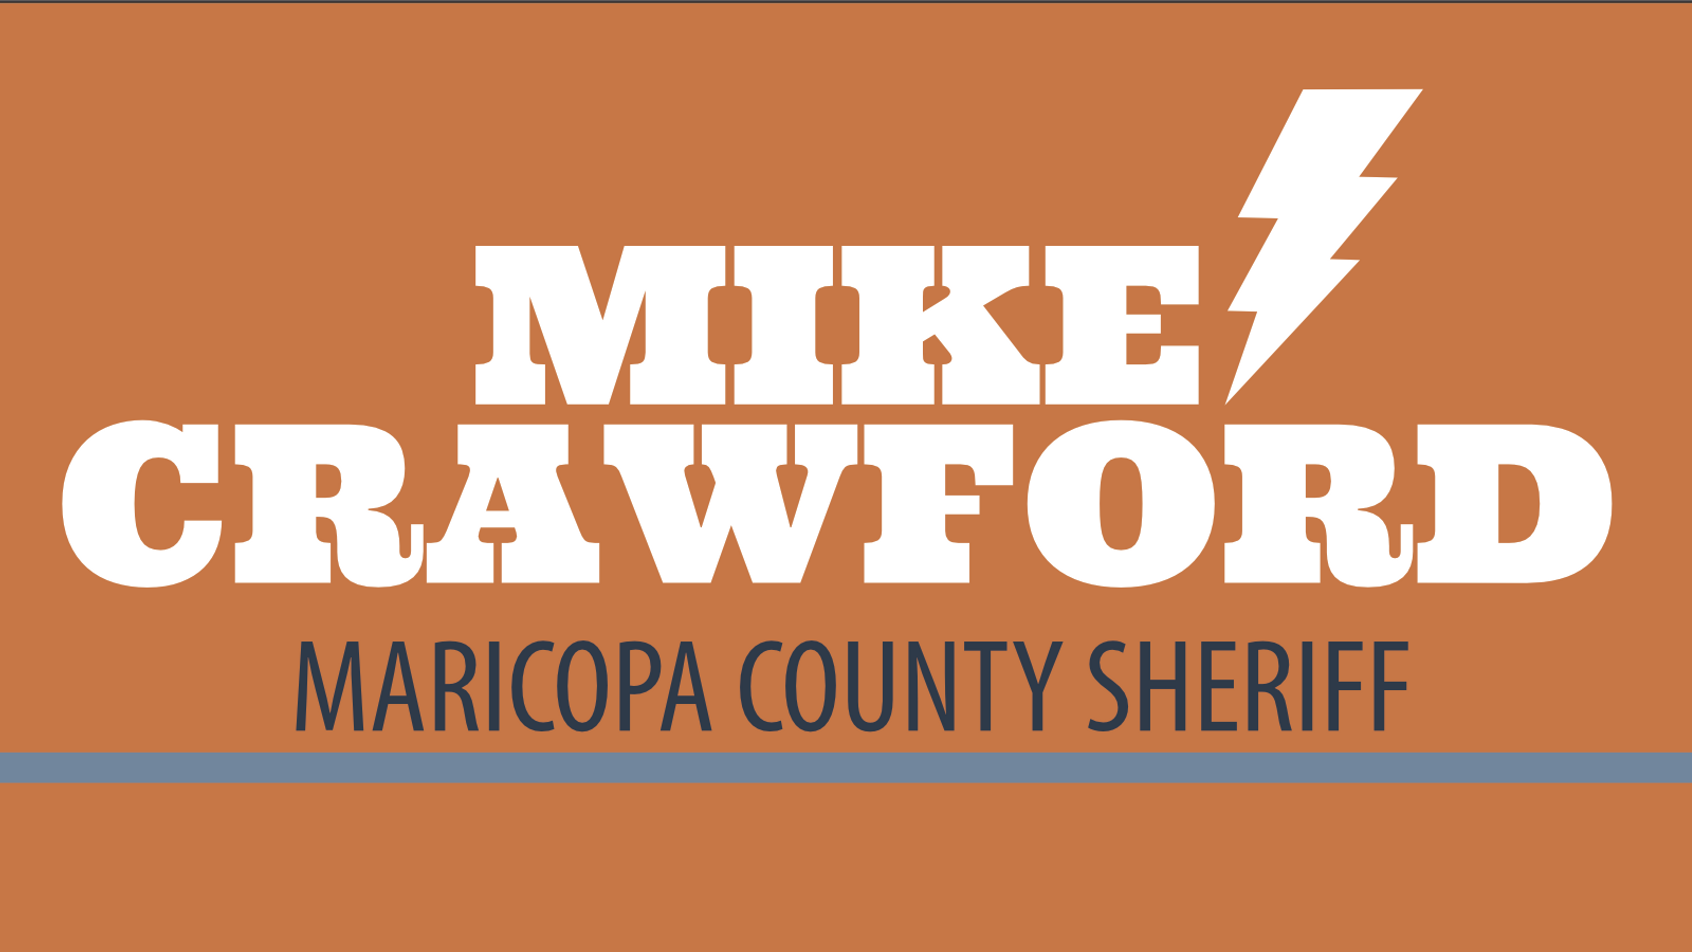 Mike Crawford for Sheriff of Maricopa County